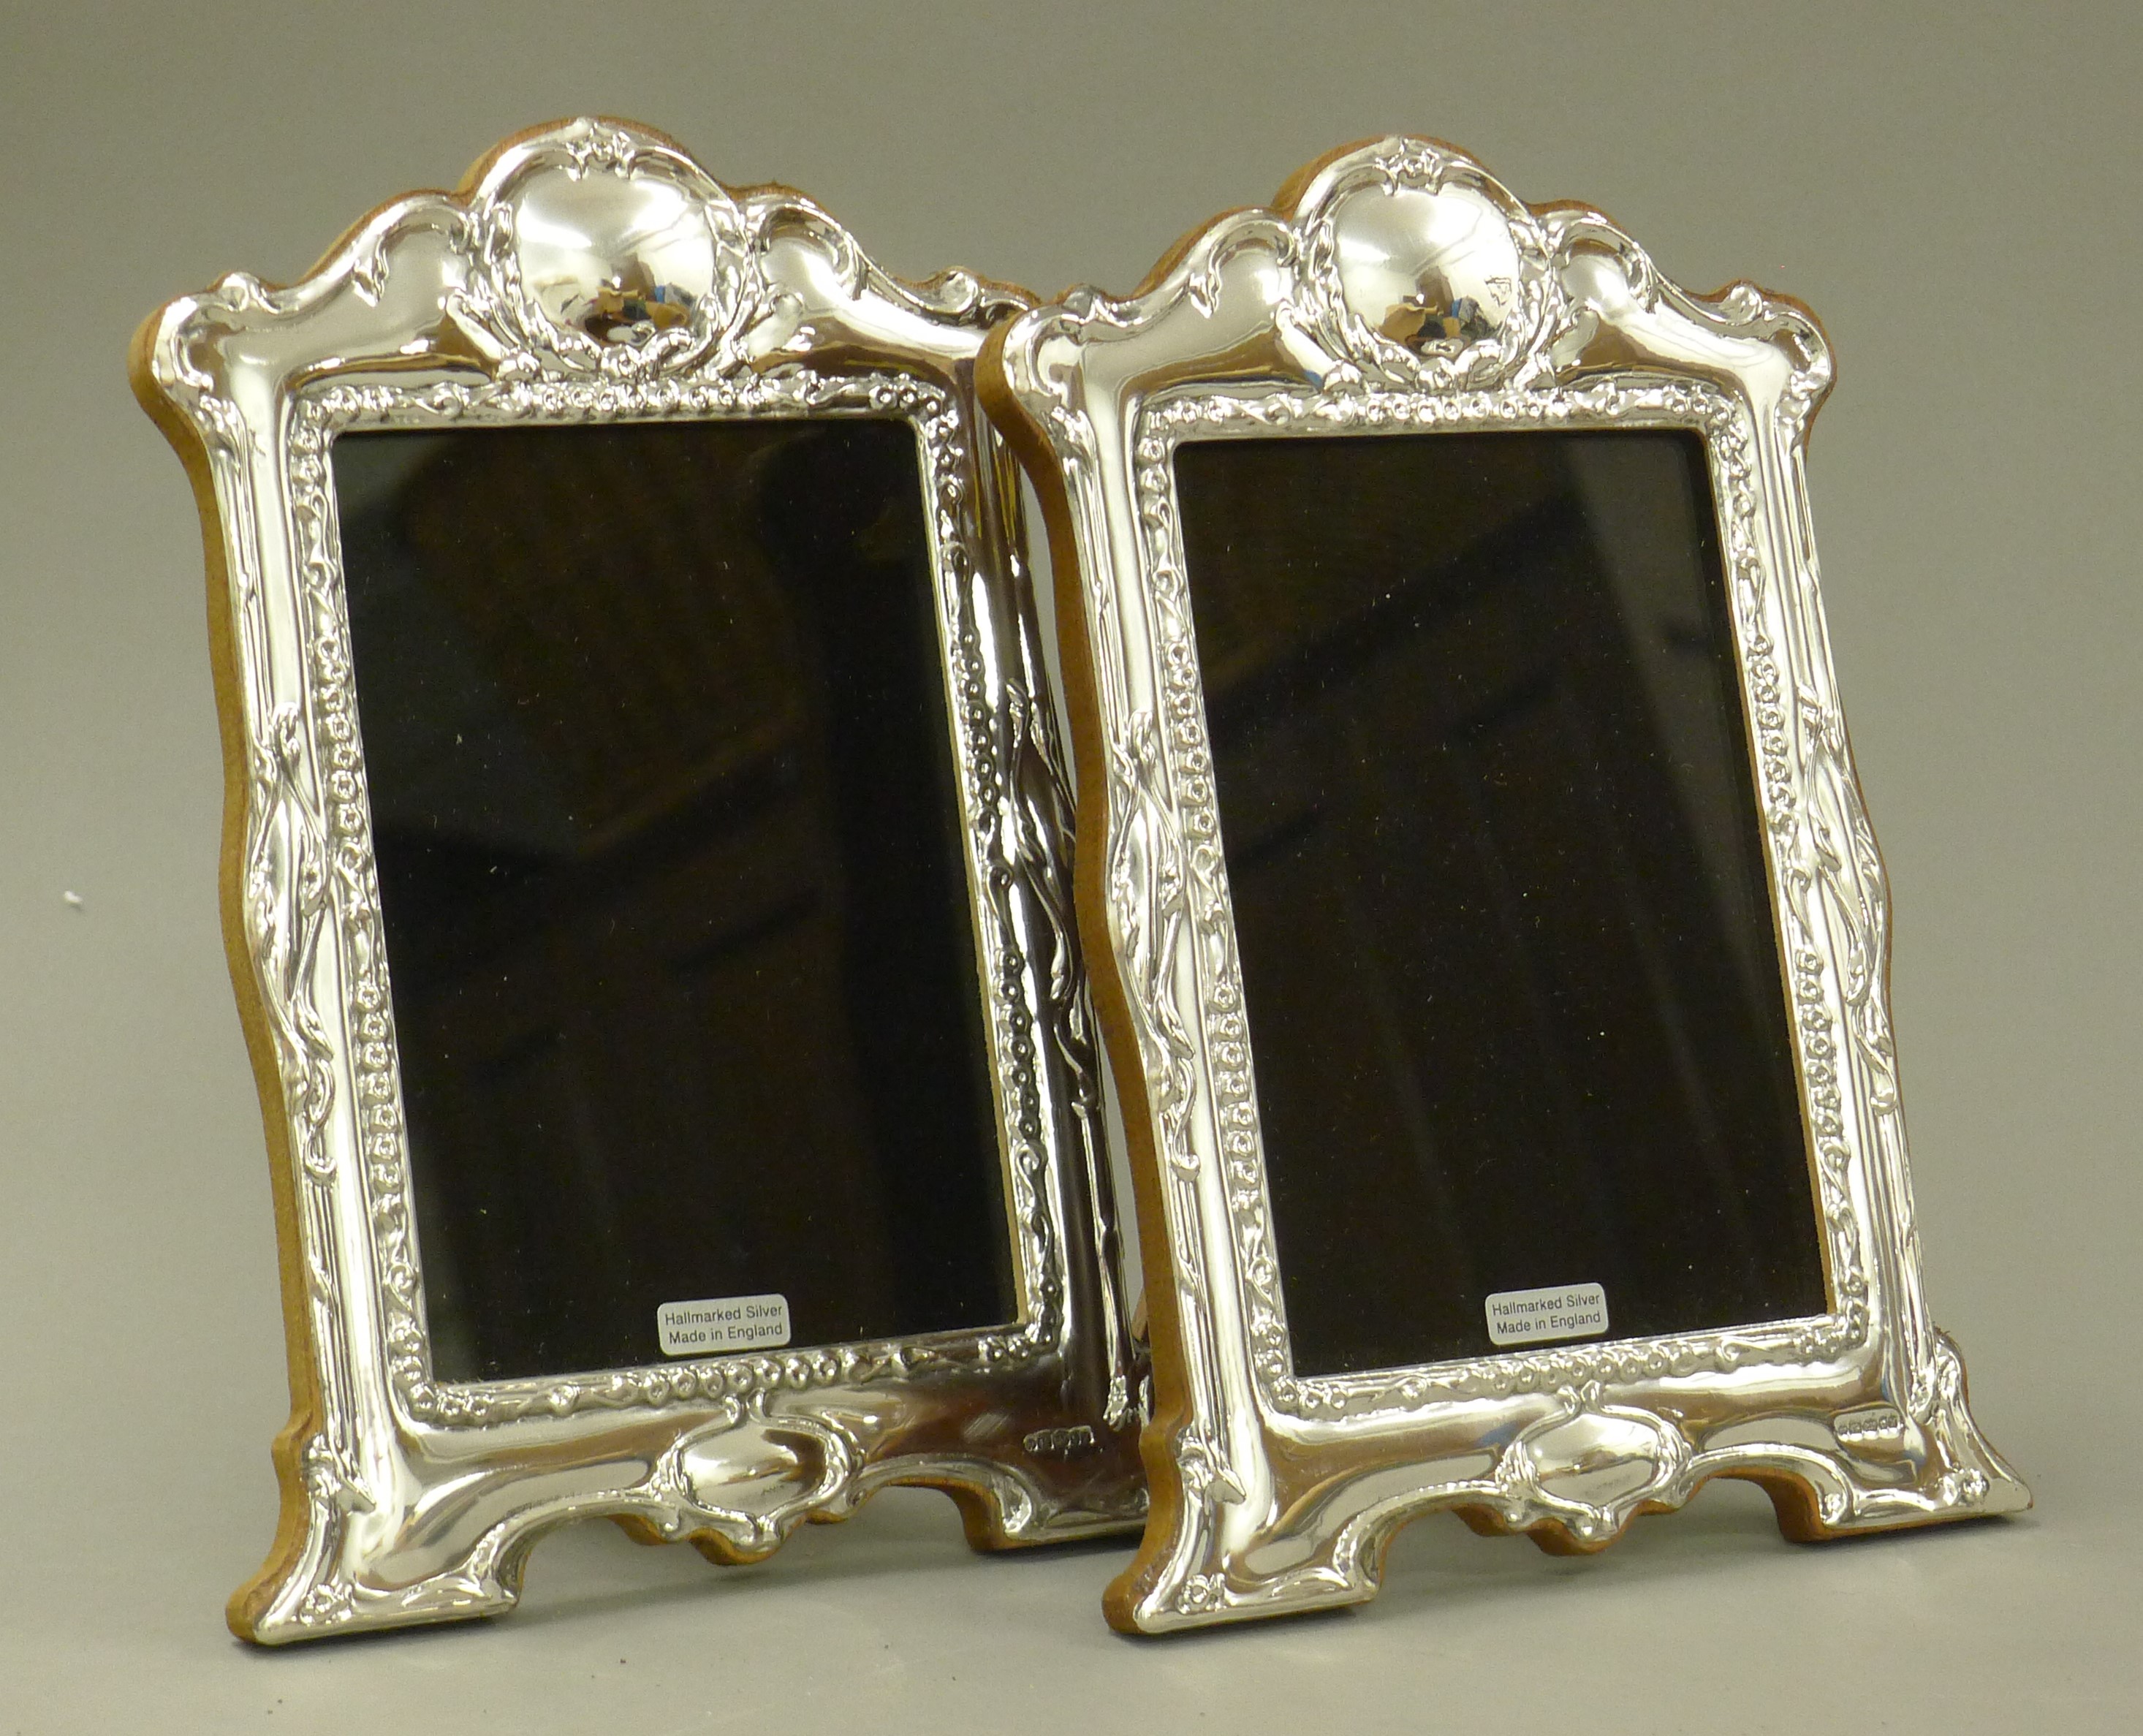 A pair of silver photograph frames.